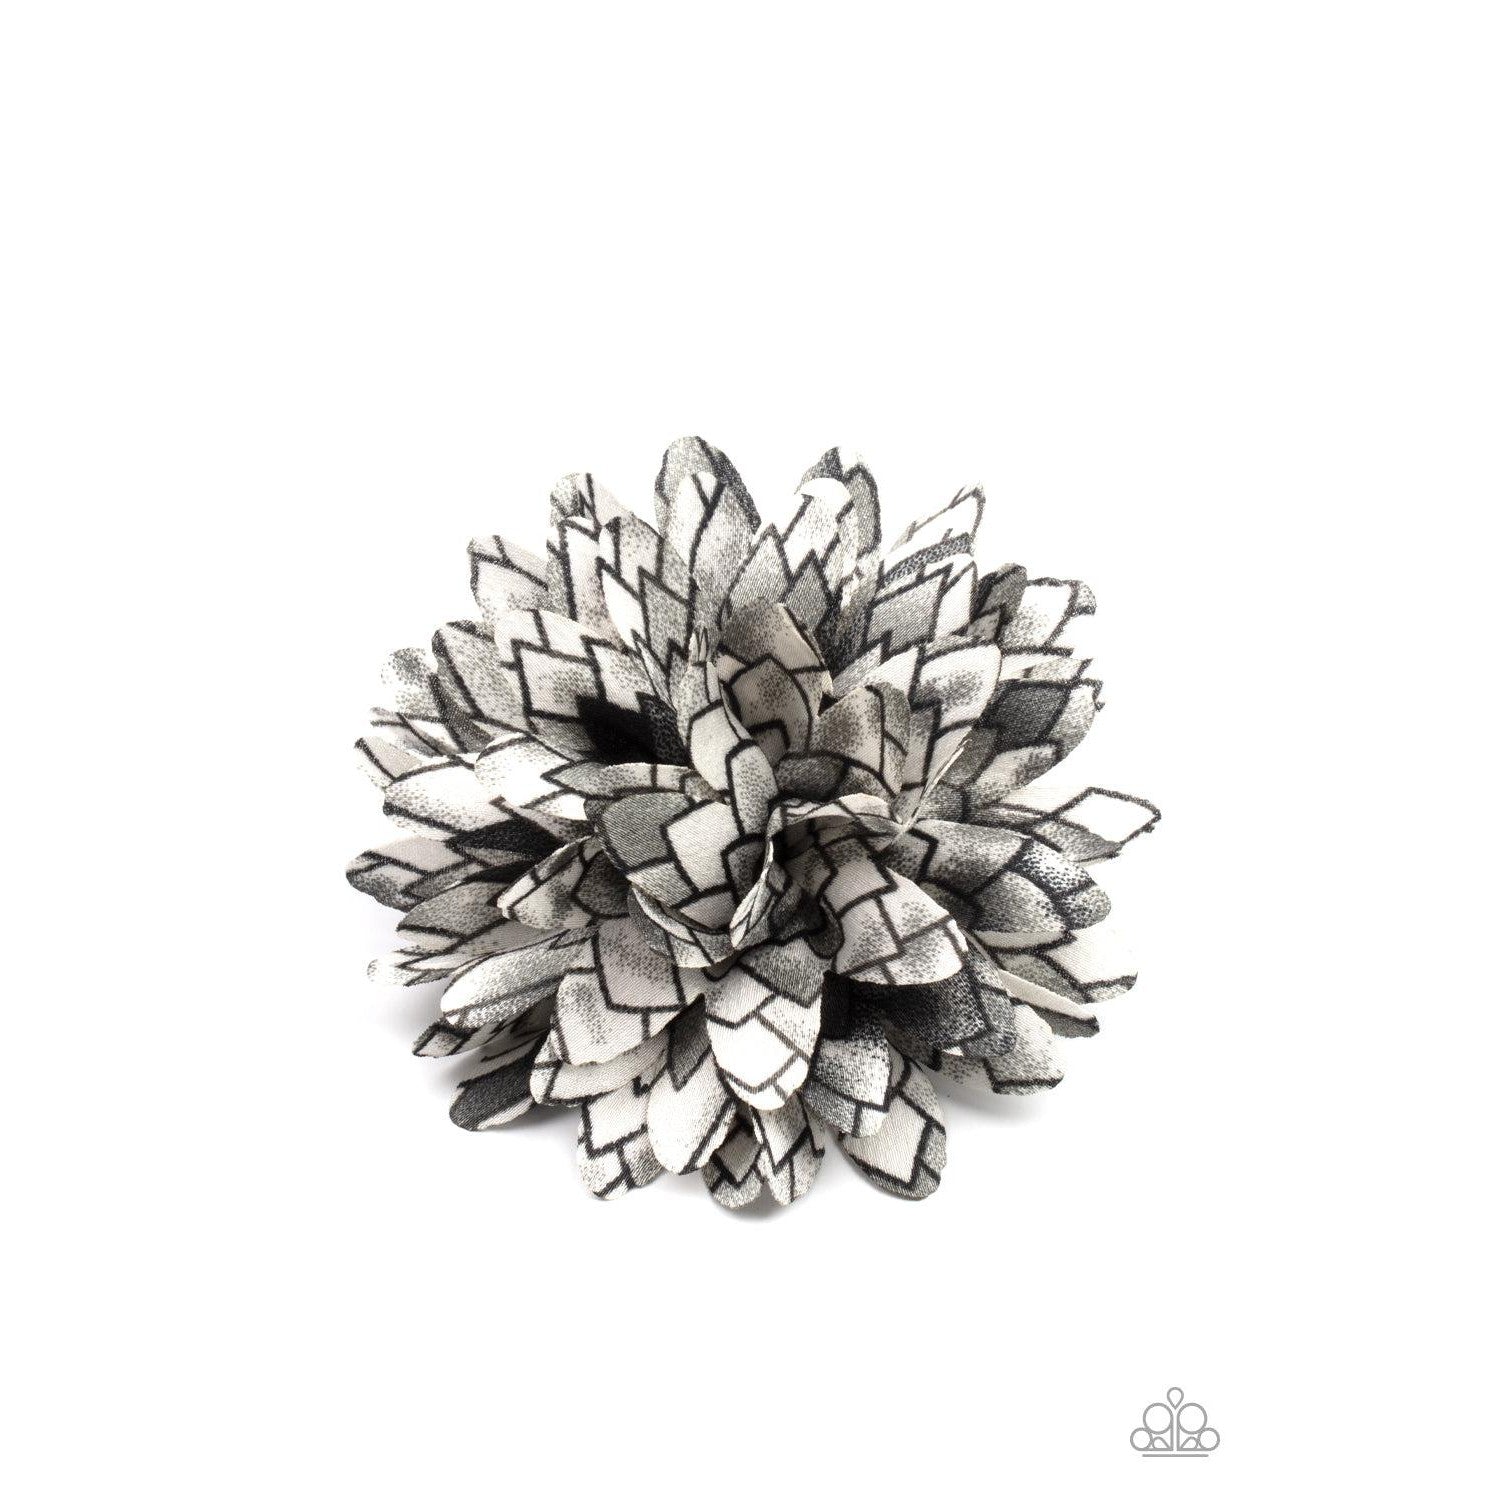 Vanguard Gardens - Black & Gray Petal Hair Clip - A Large Selection Hand-Chains And Jewelry On rainbowartsreview,Women's Jewelry | Necklaces, Earrings, Bracelets